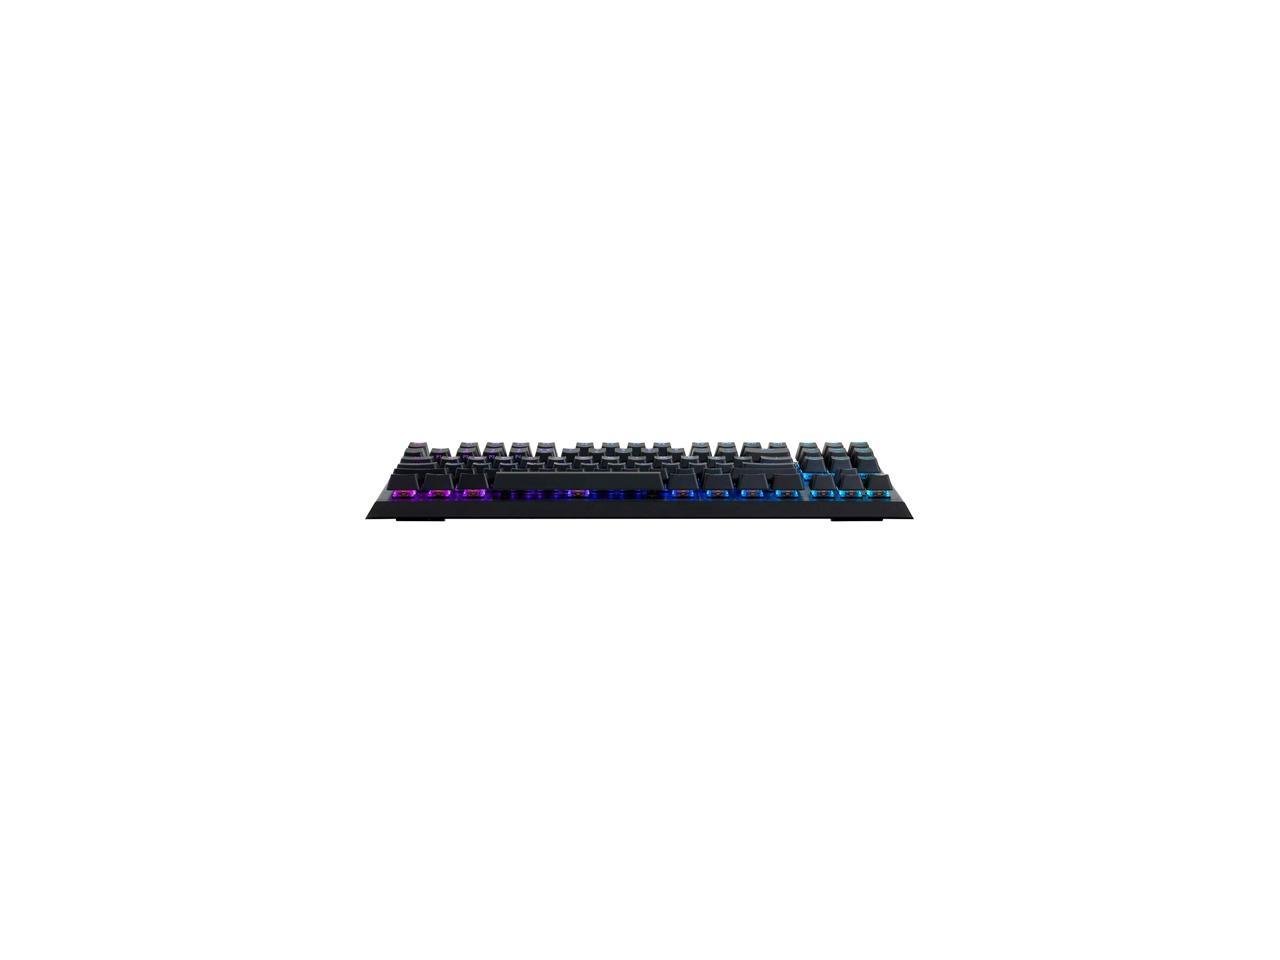 Cooler Master CK530 Tenkeyless Gaming Mechanical Keyboard with Blue Switches, RGB Backlighting, On-the-Fly Controls, and Aluminum Top Plate